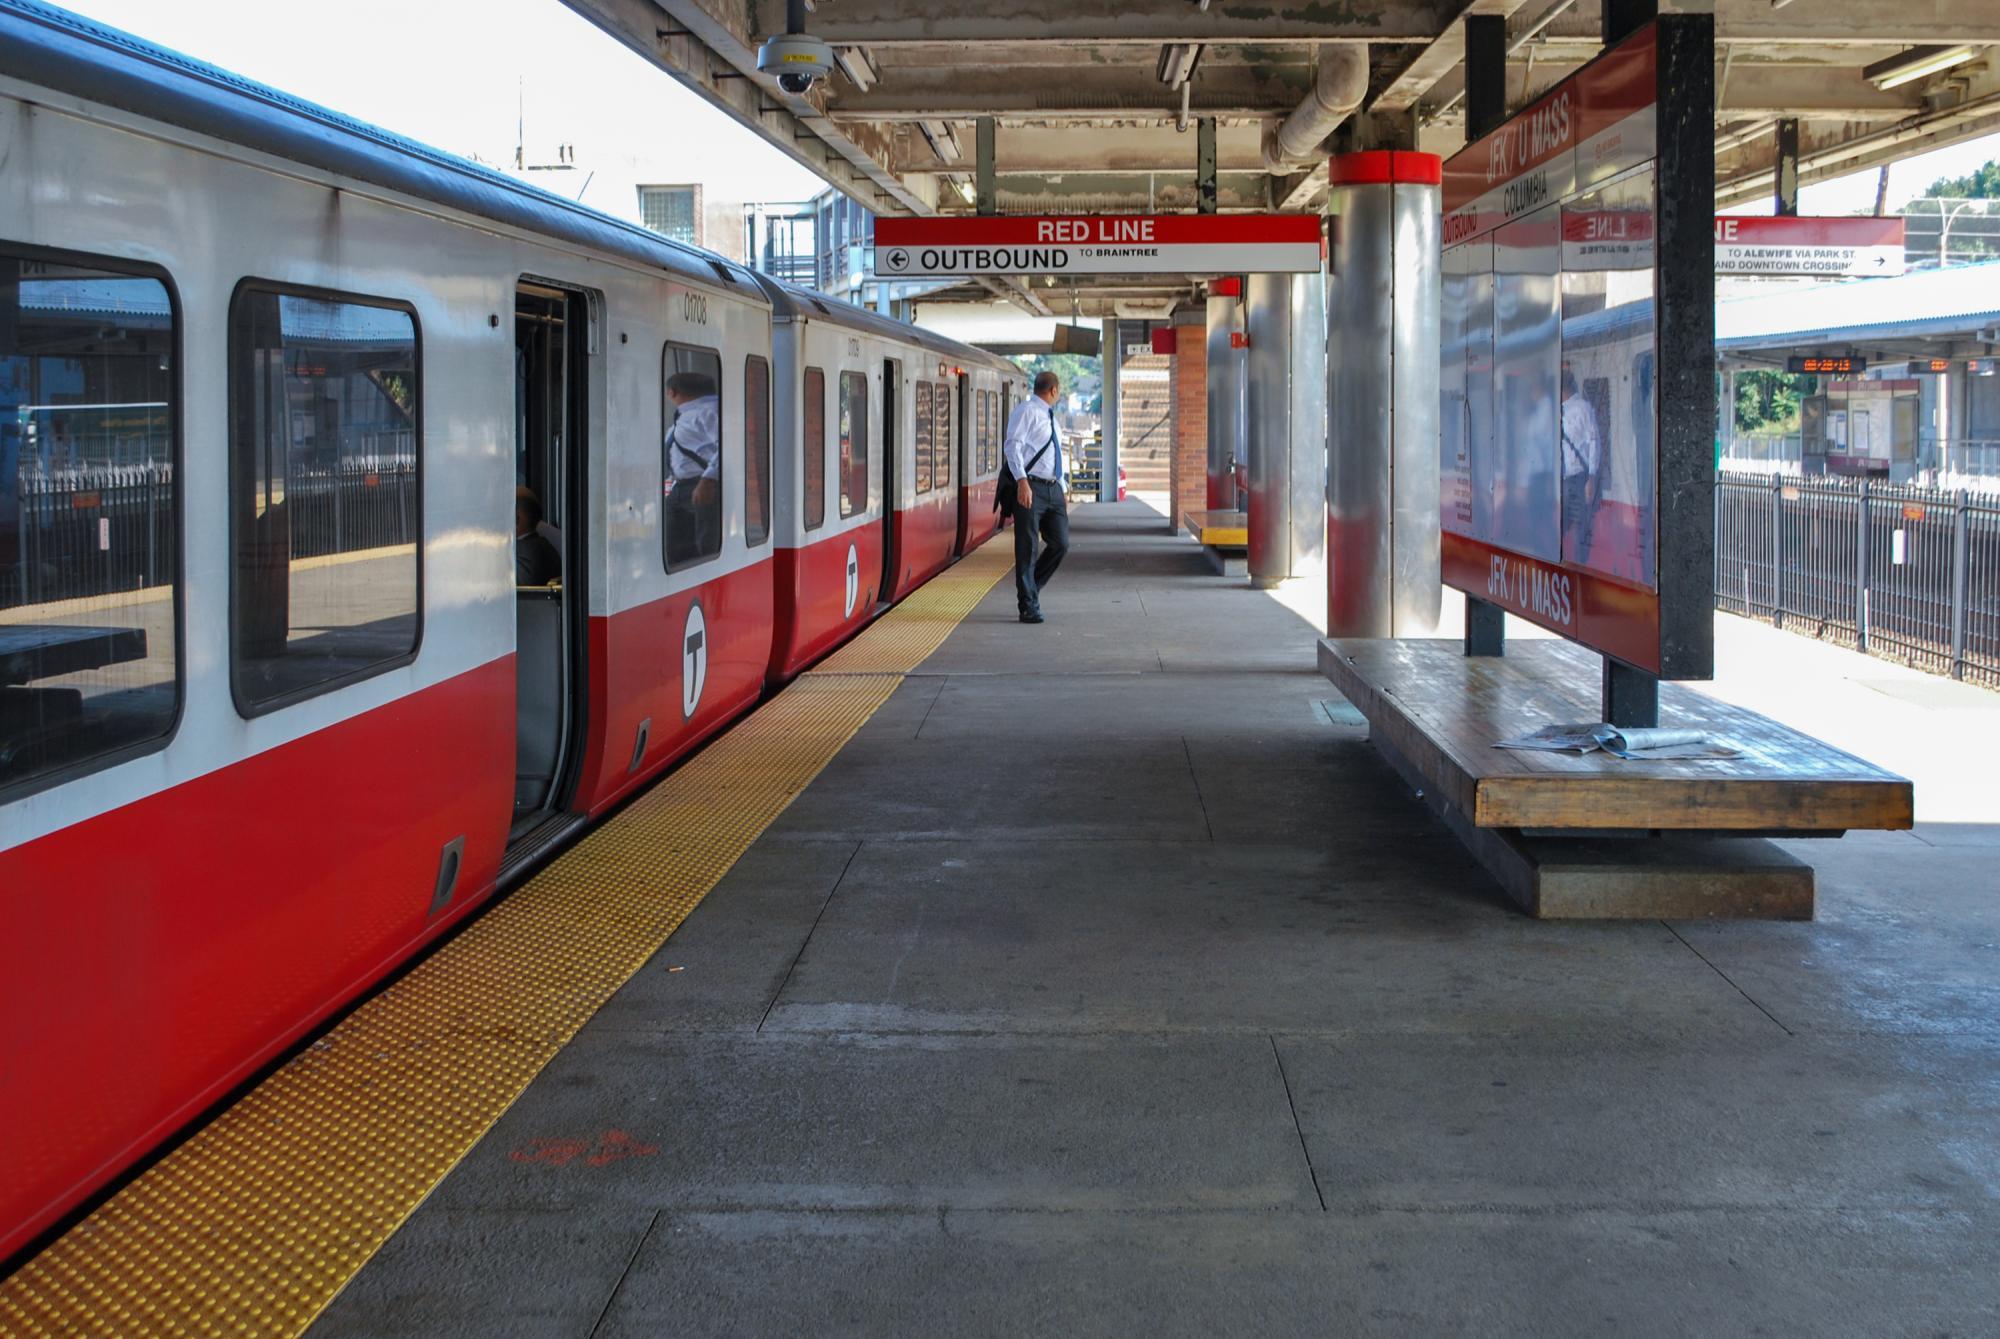 A man on the sunlit JFK/UMass platform, with a Red Line train pulled up